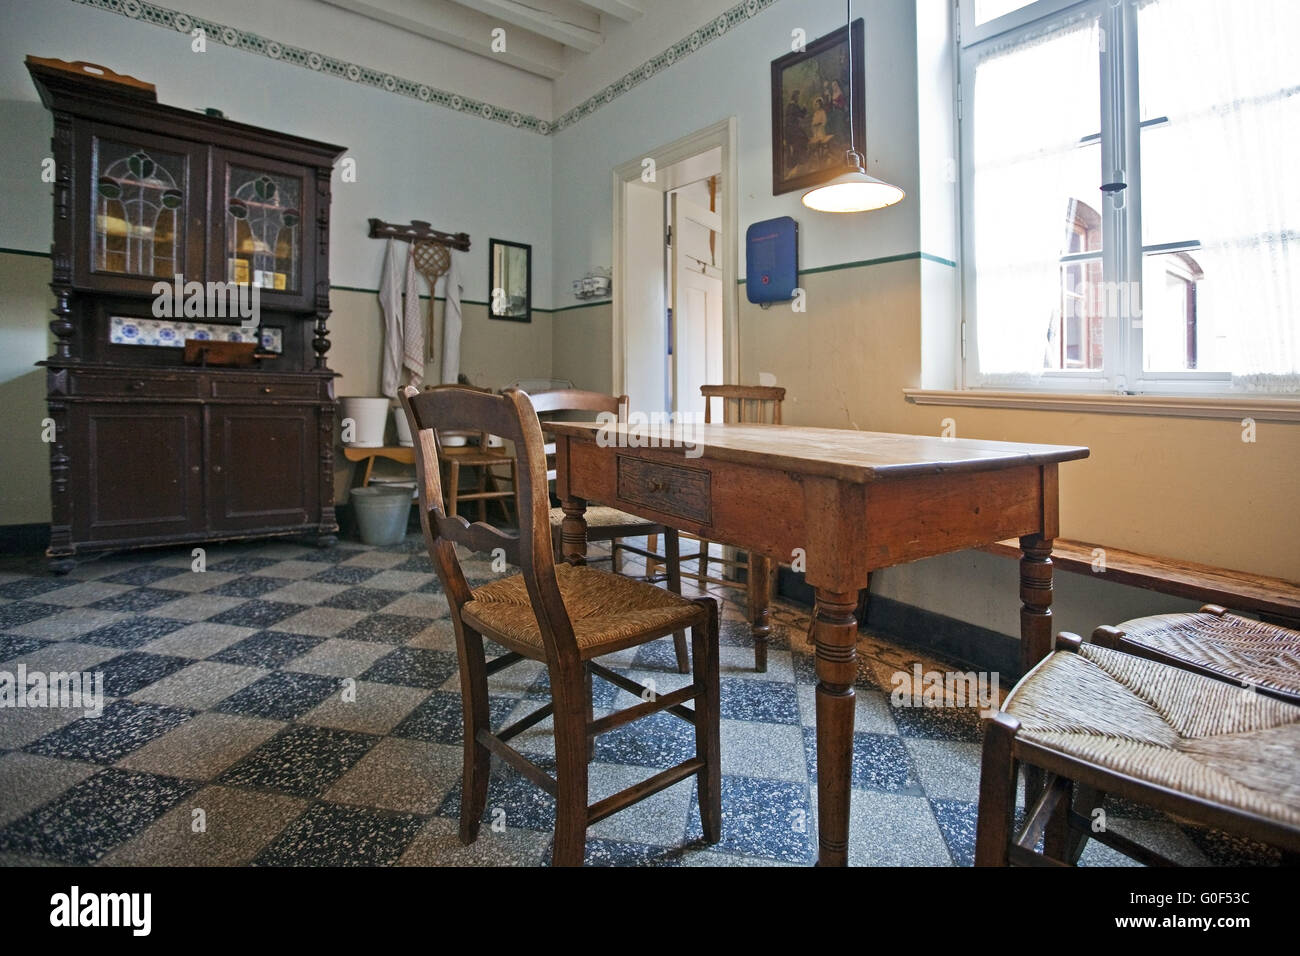 Kitchen of a worker's apartment in 1920 in the Textile Museum Bocholt, Muensterland, Germany Stock Photo